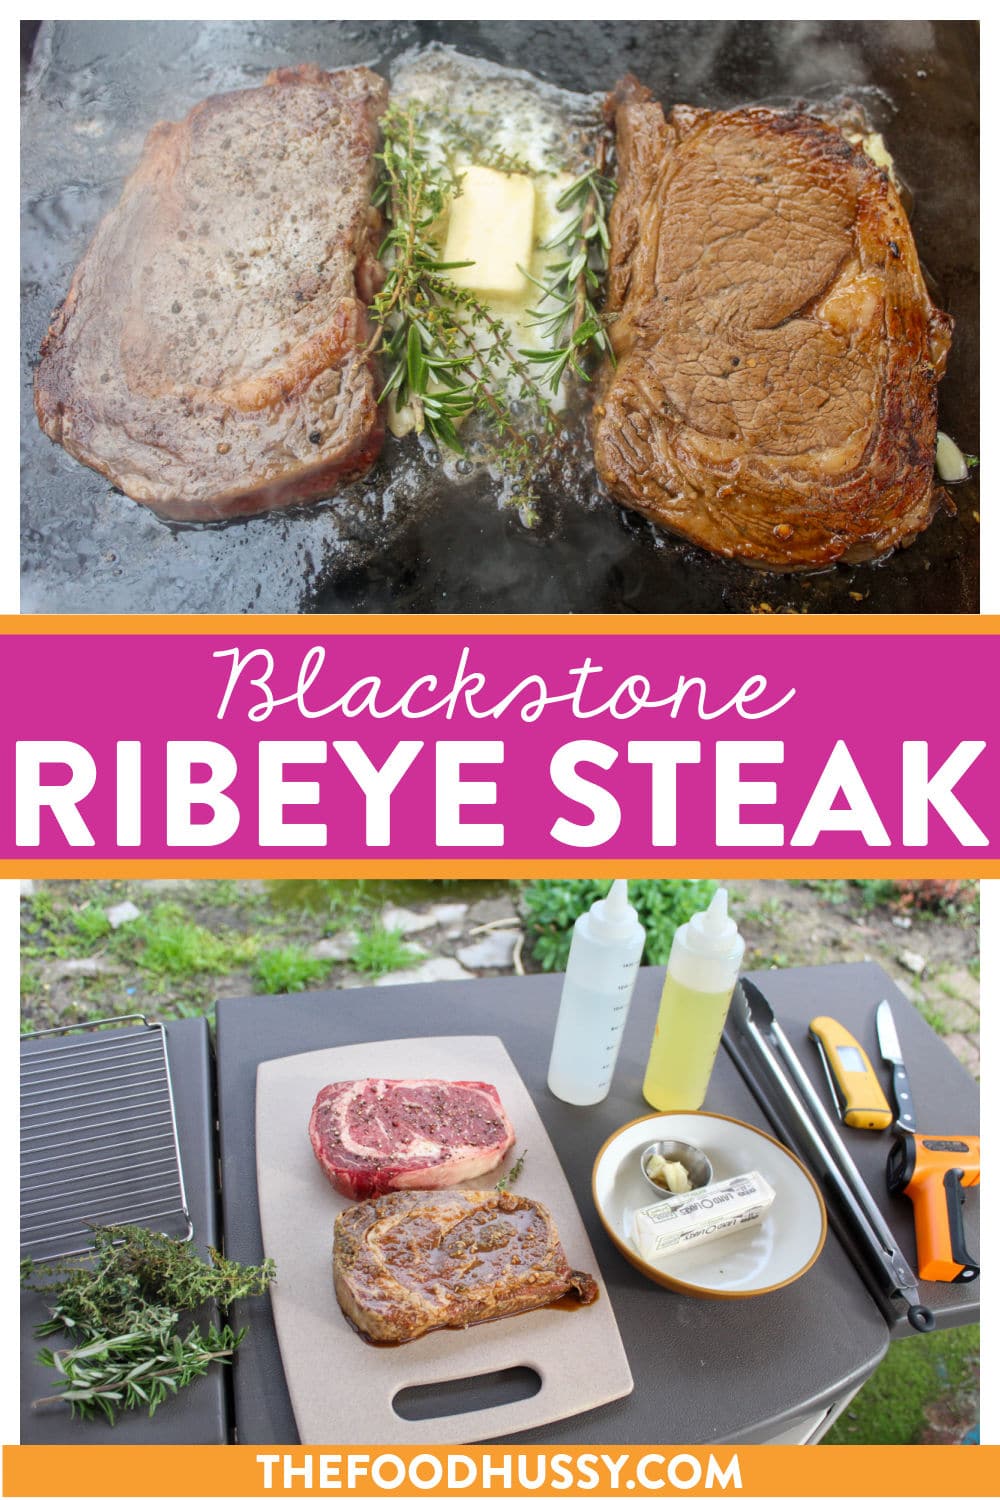 Making Steak on the Blackstone is simple, quick and delicious! Whether you season or marinade your steak, you will have a juicy steak gracing your dinner table! Plus - it's always more fun when you cook outside on your Blackstone! via @foodhussy